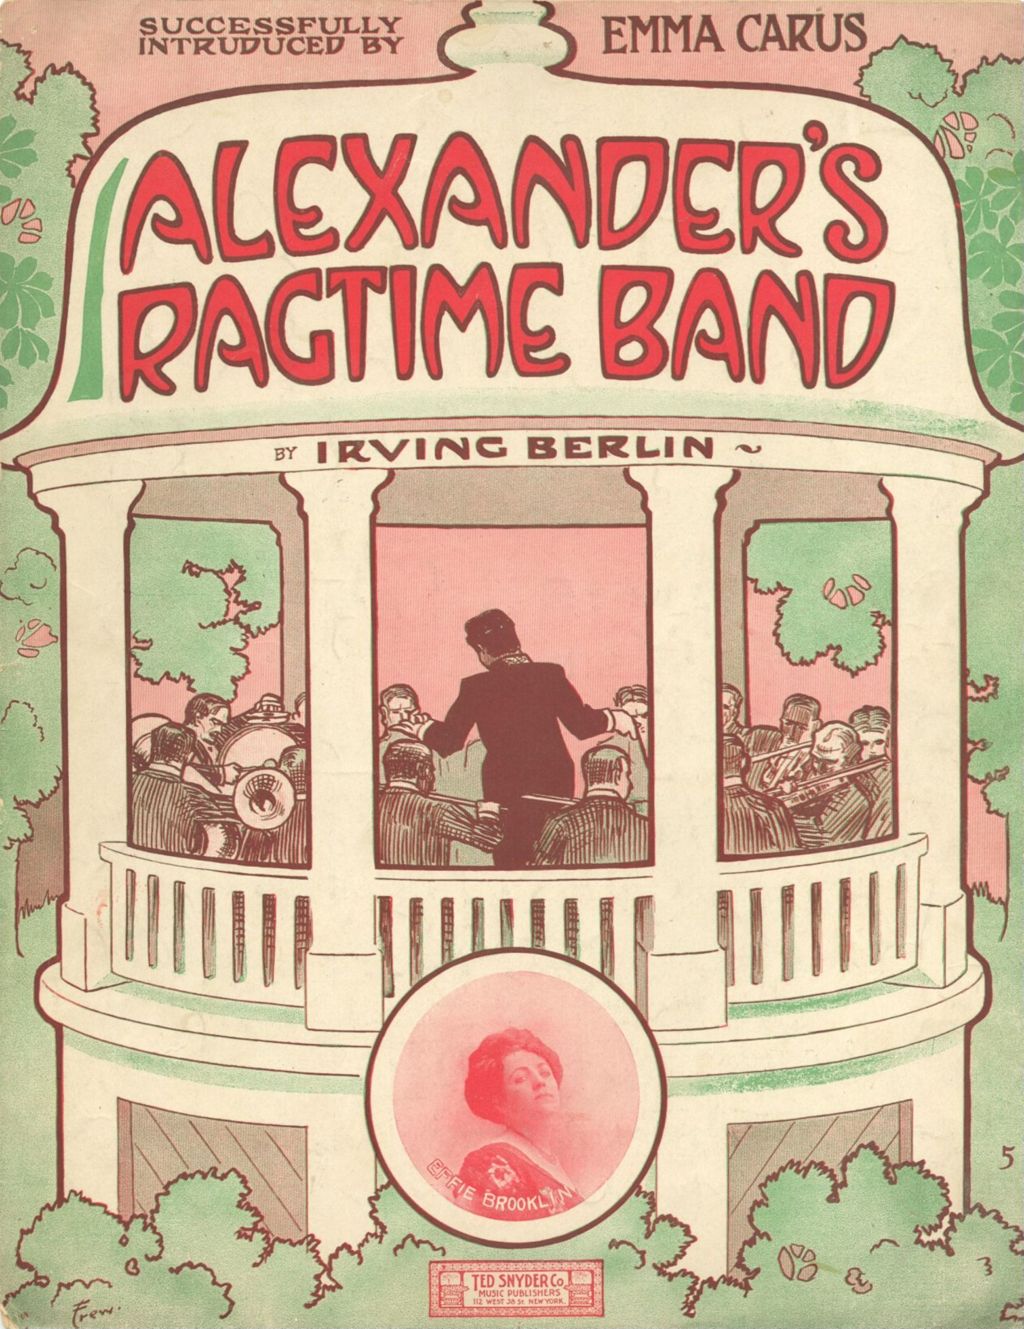 Miniature of Alexander's Ragtime Band